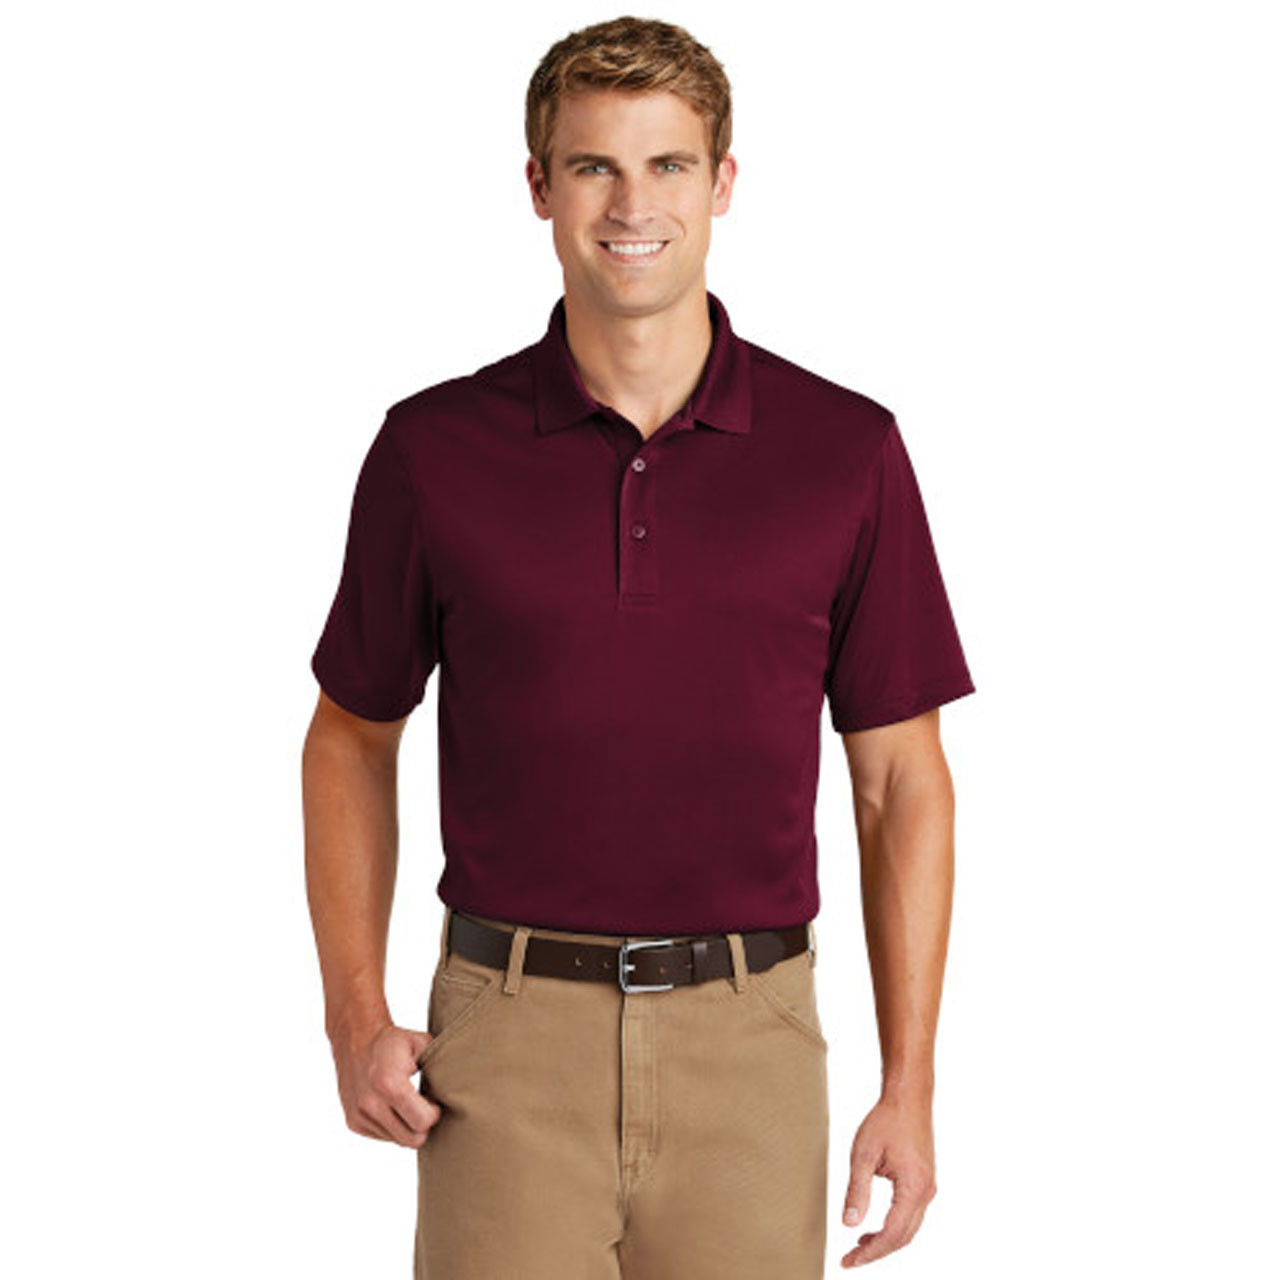 What type of collar does the men's maroon polo shirt have?